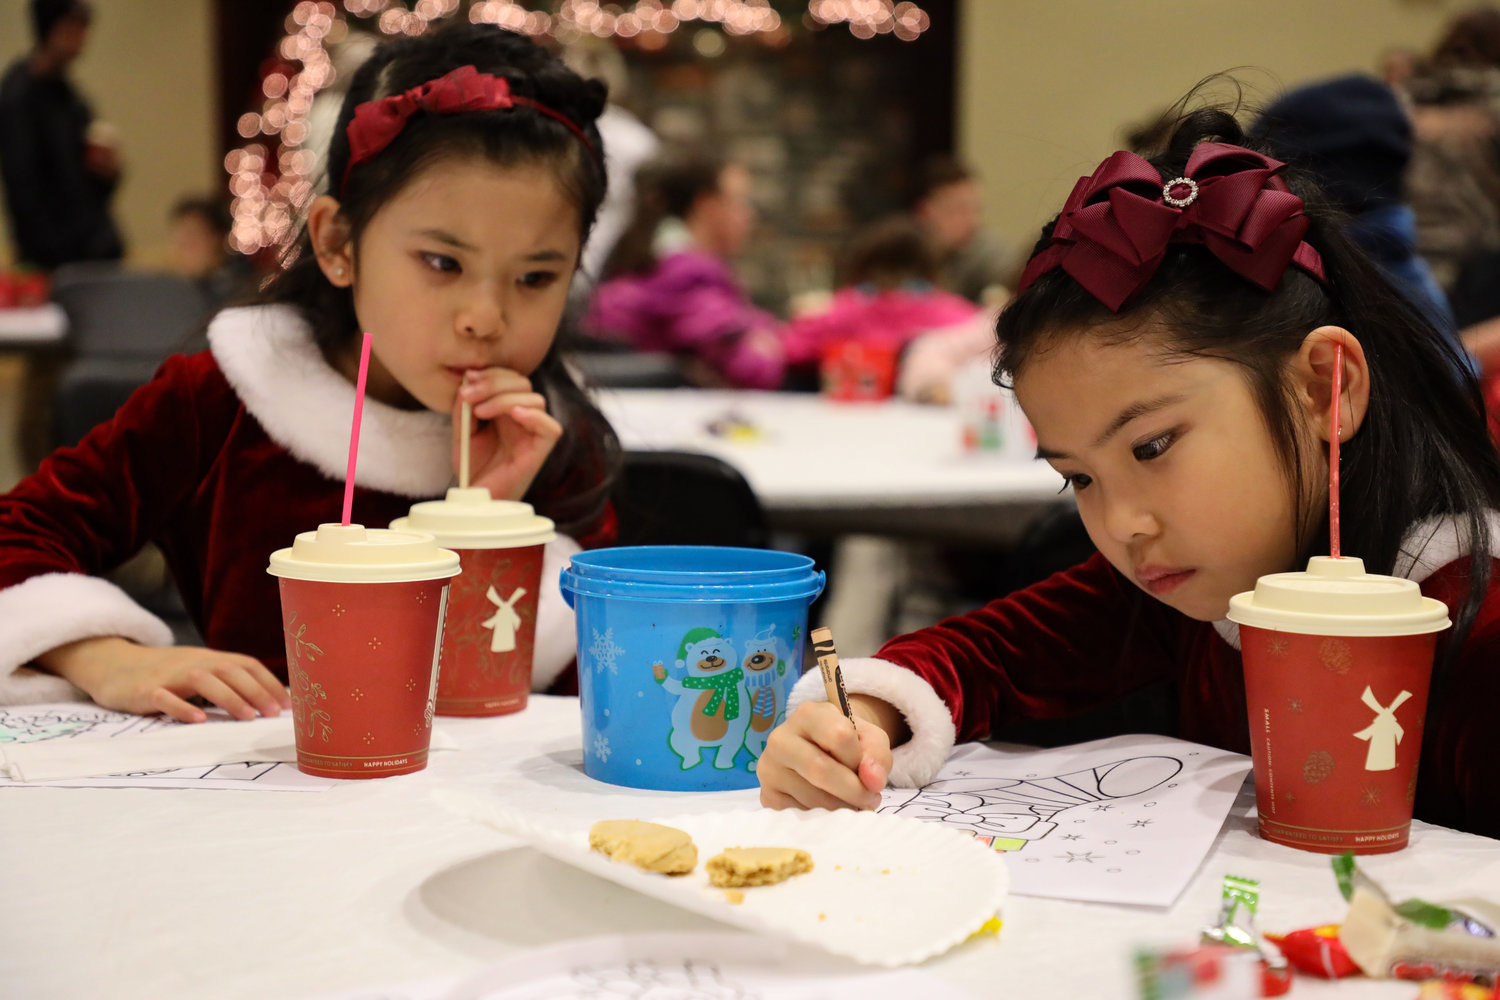 From left to right, 5-year old Victoria Chu and 7-year-old Jasmine Chu, of Battle Ground, enjoy hot cocoa, cookies and coloring during the annual tree lighting at the Battle Ground Community Center.